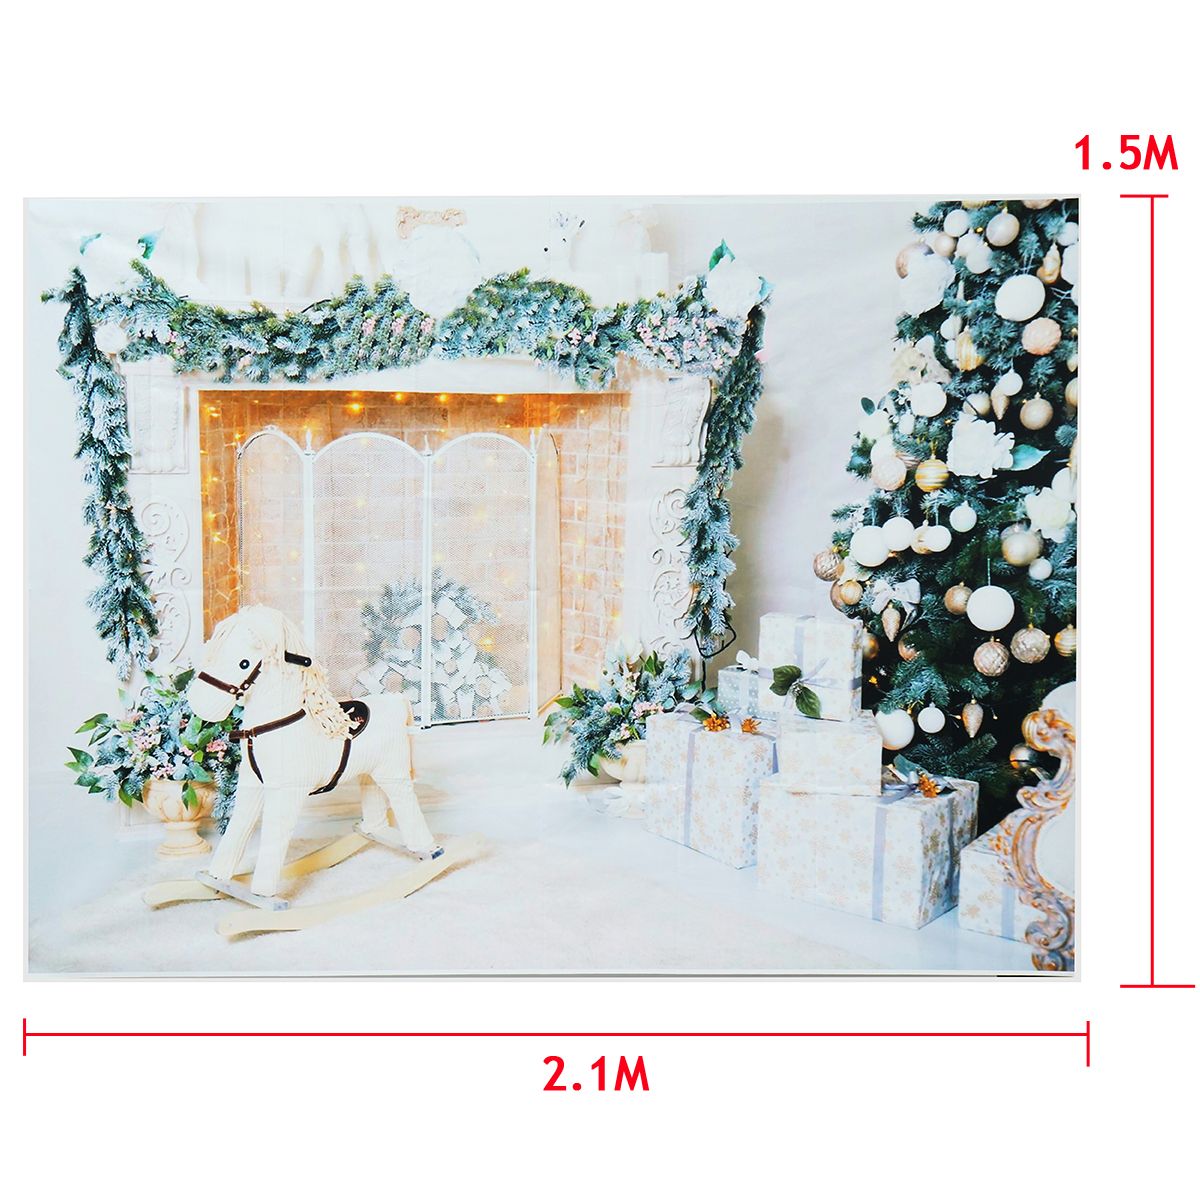 7x5FT-White-Room-Christmas-Tree-Gift-Wooden-Horse-Photography-Backdrop-Studio-Prop-Background-1404981